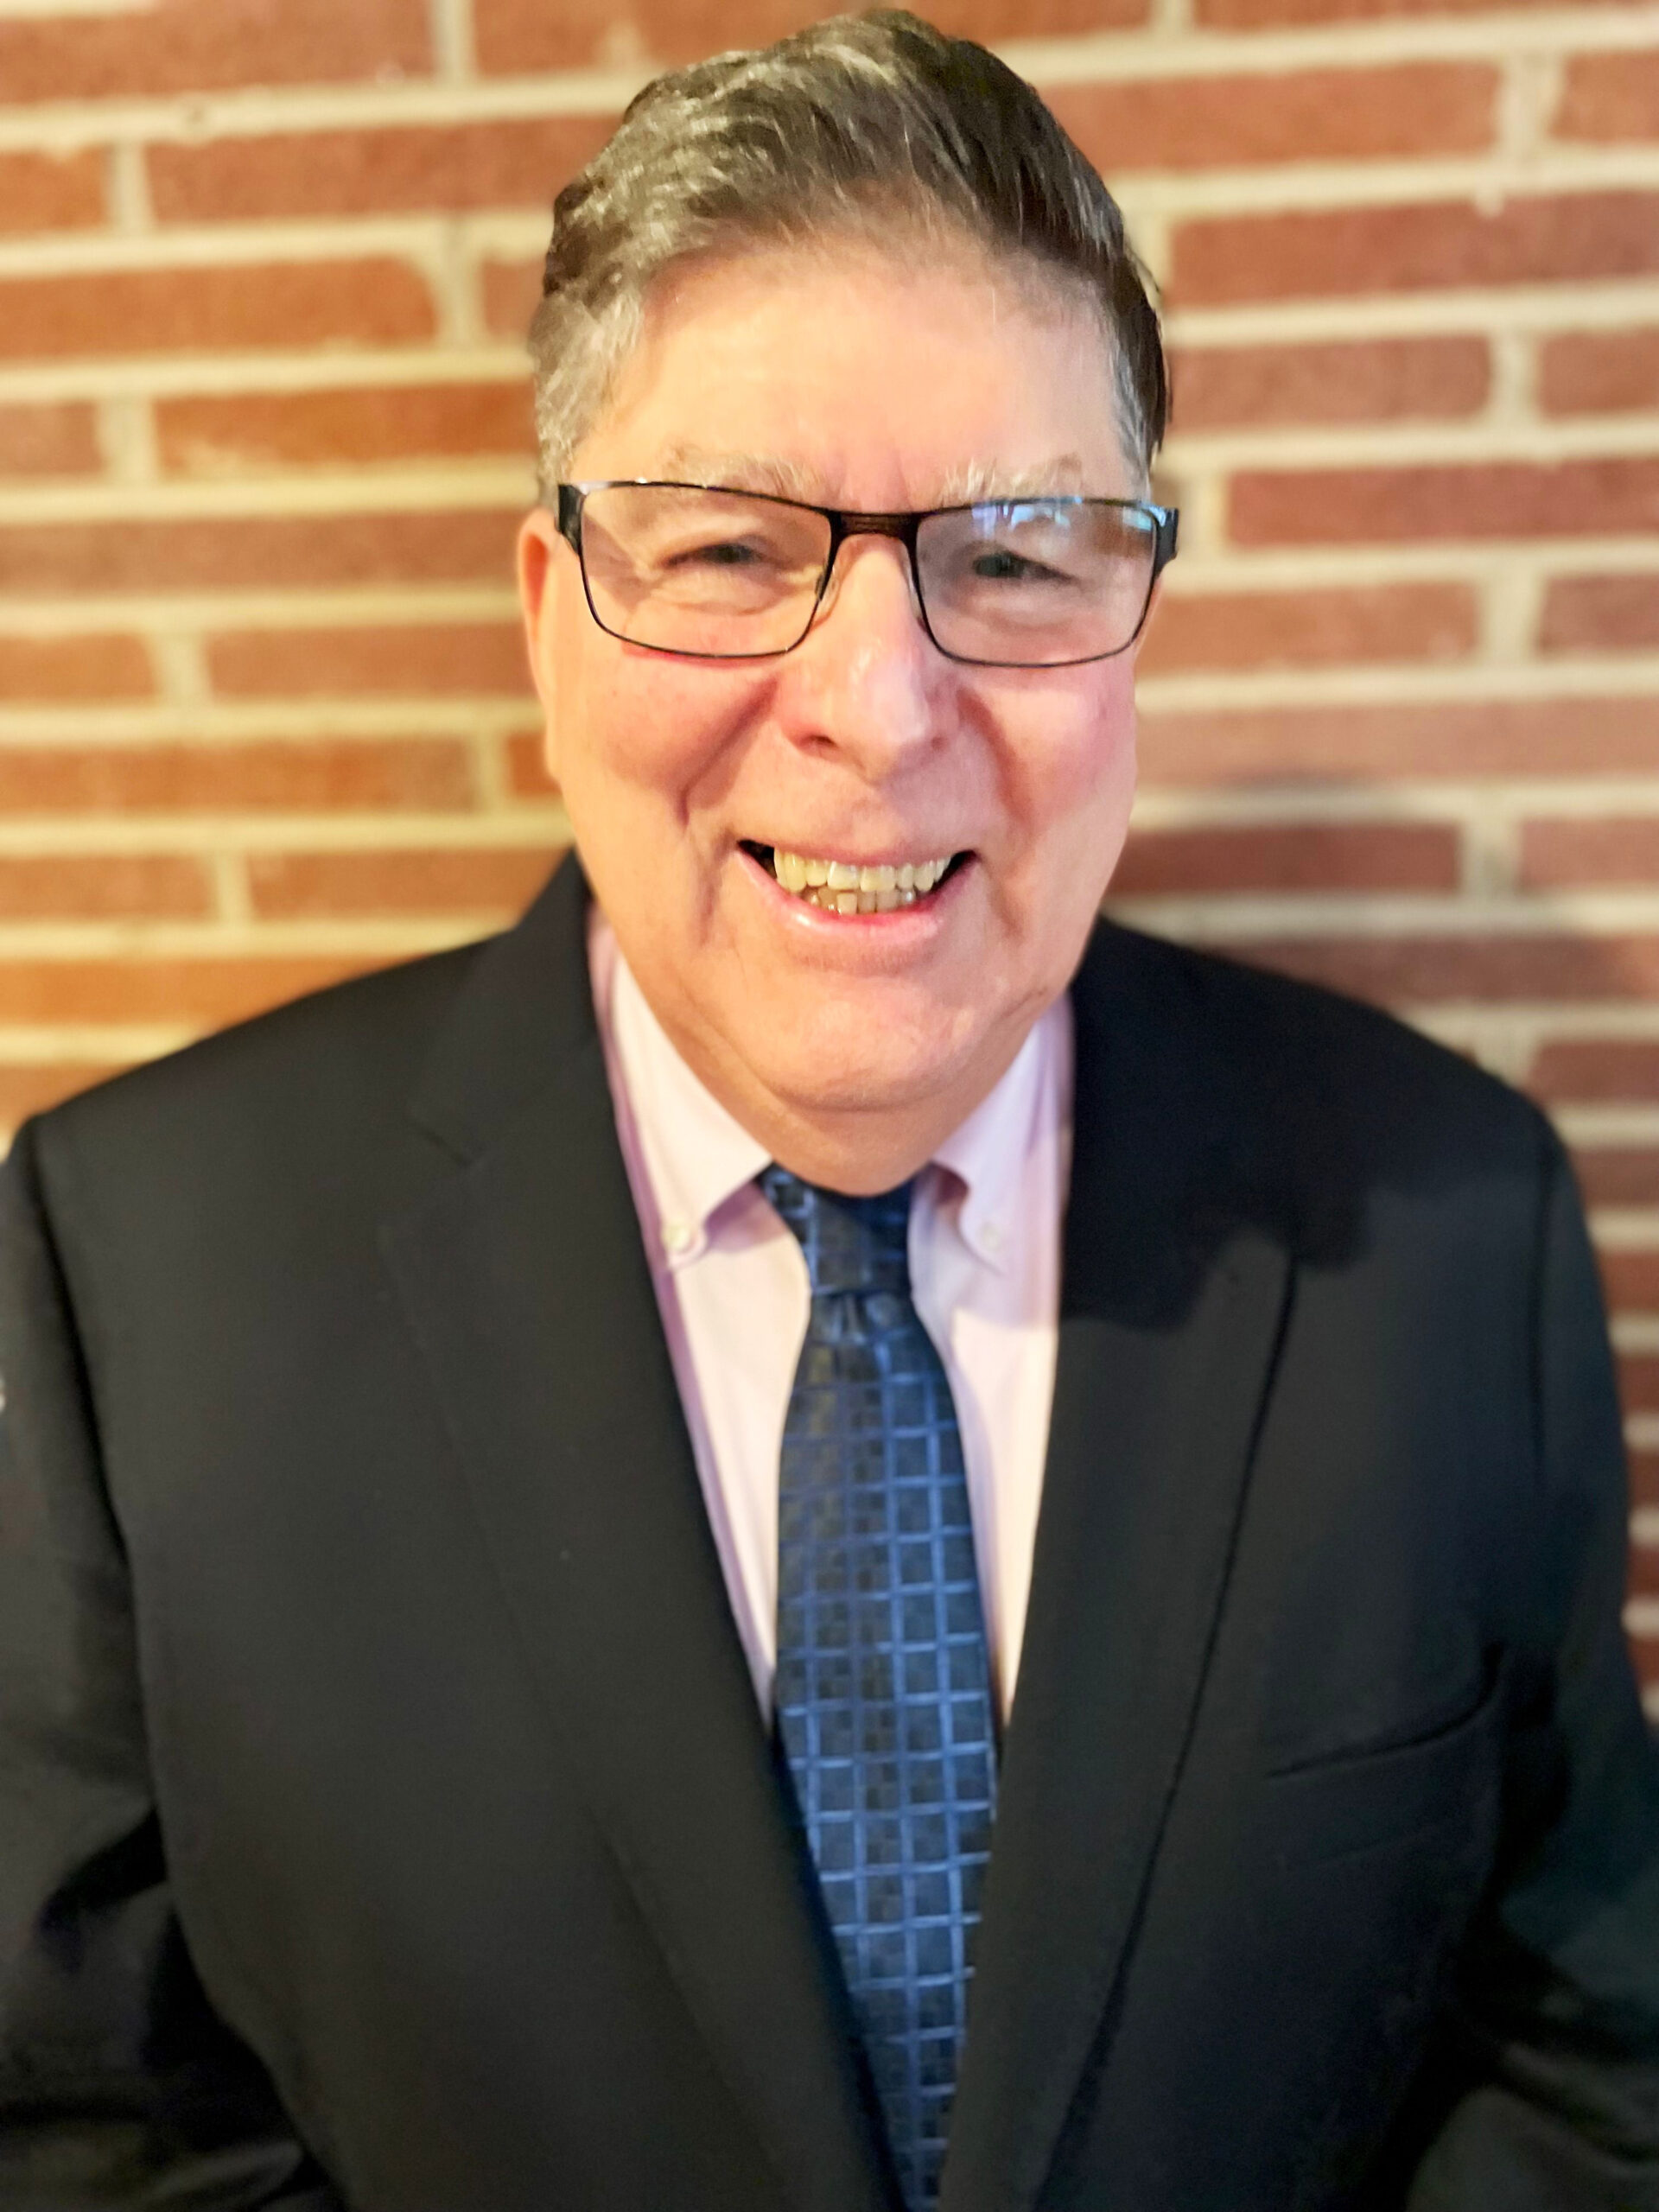 Rabbi Charles Feinberg is a retired from Washington, D.C,’s Adas Israel Congregation. Most recently, served as executive director of Interfaith Action for Human Rights, retiring in December. Photo courtesy Charles Feinberg